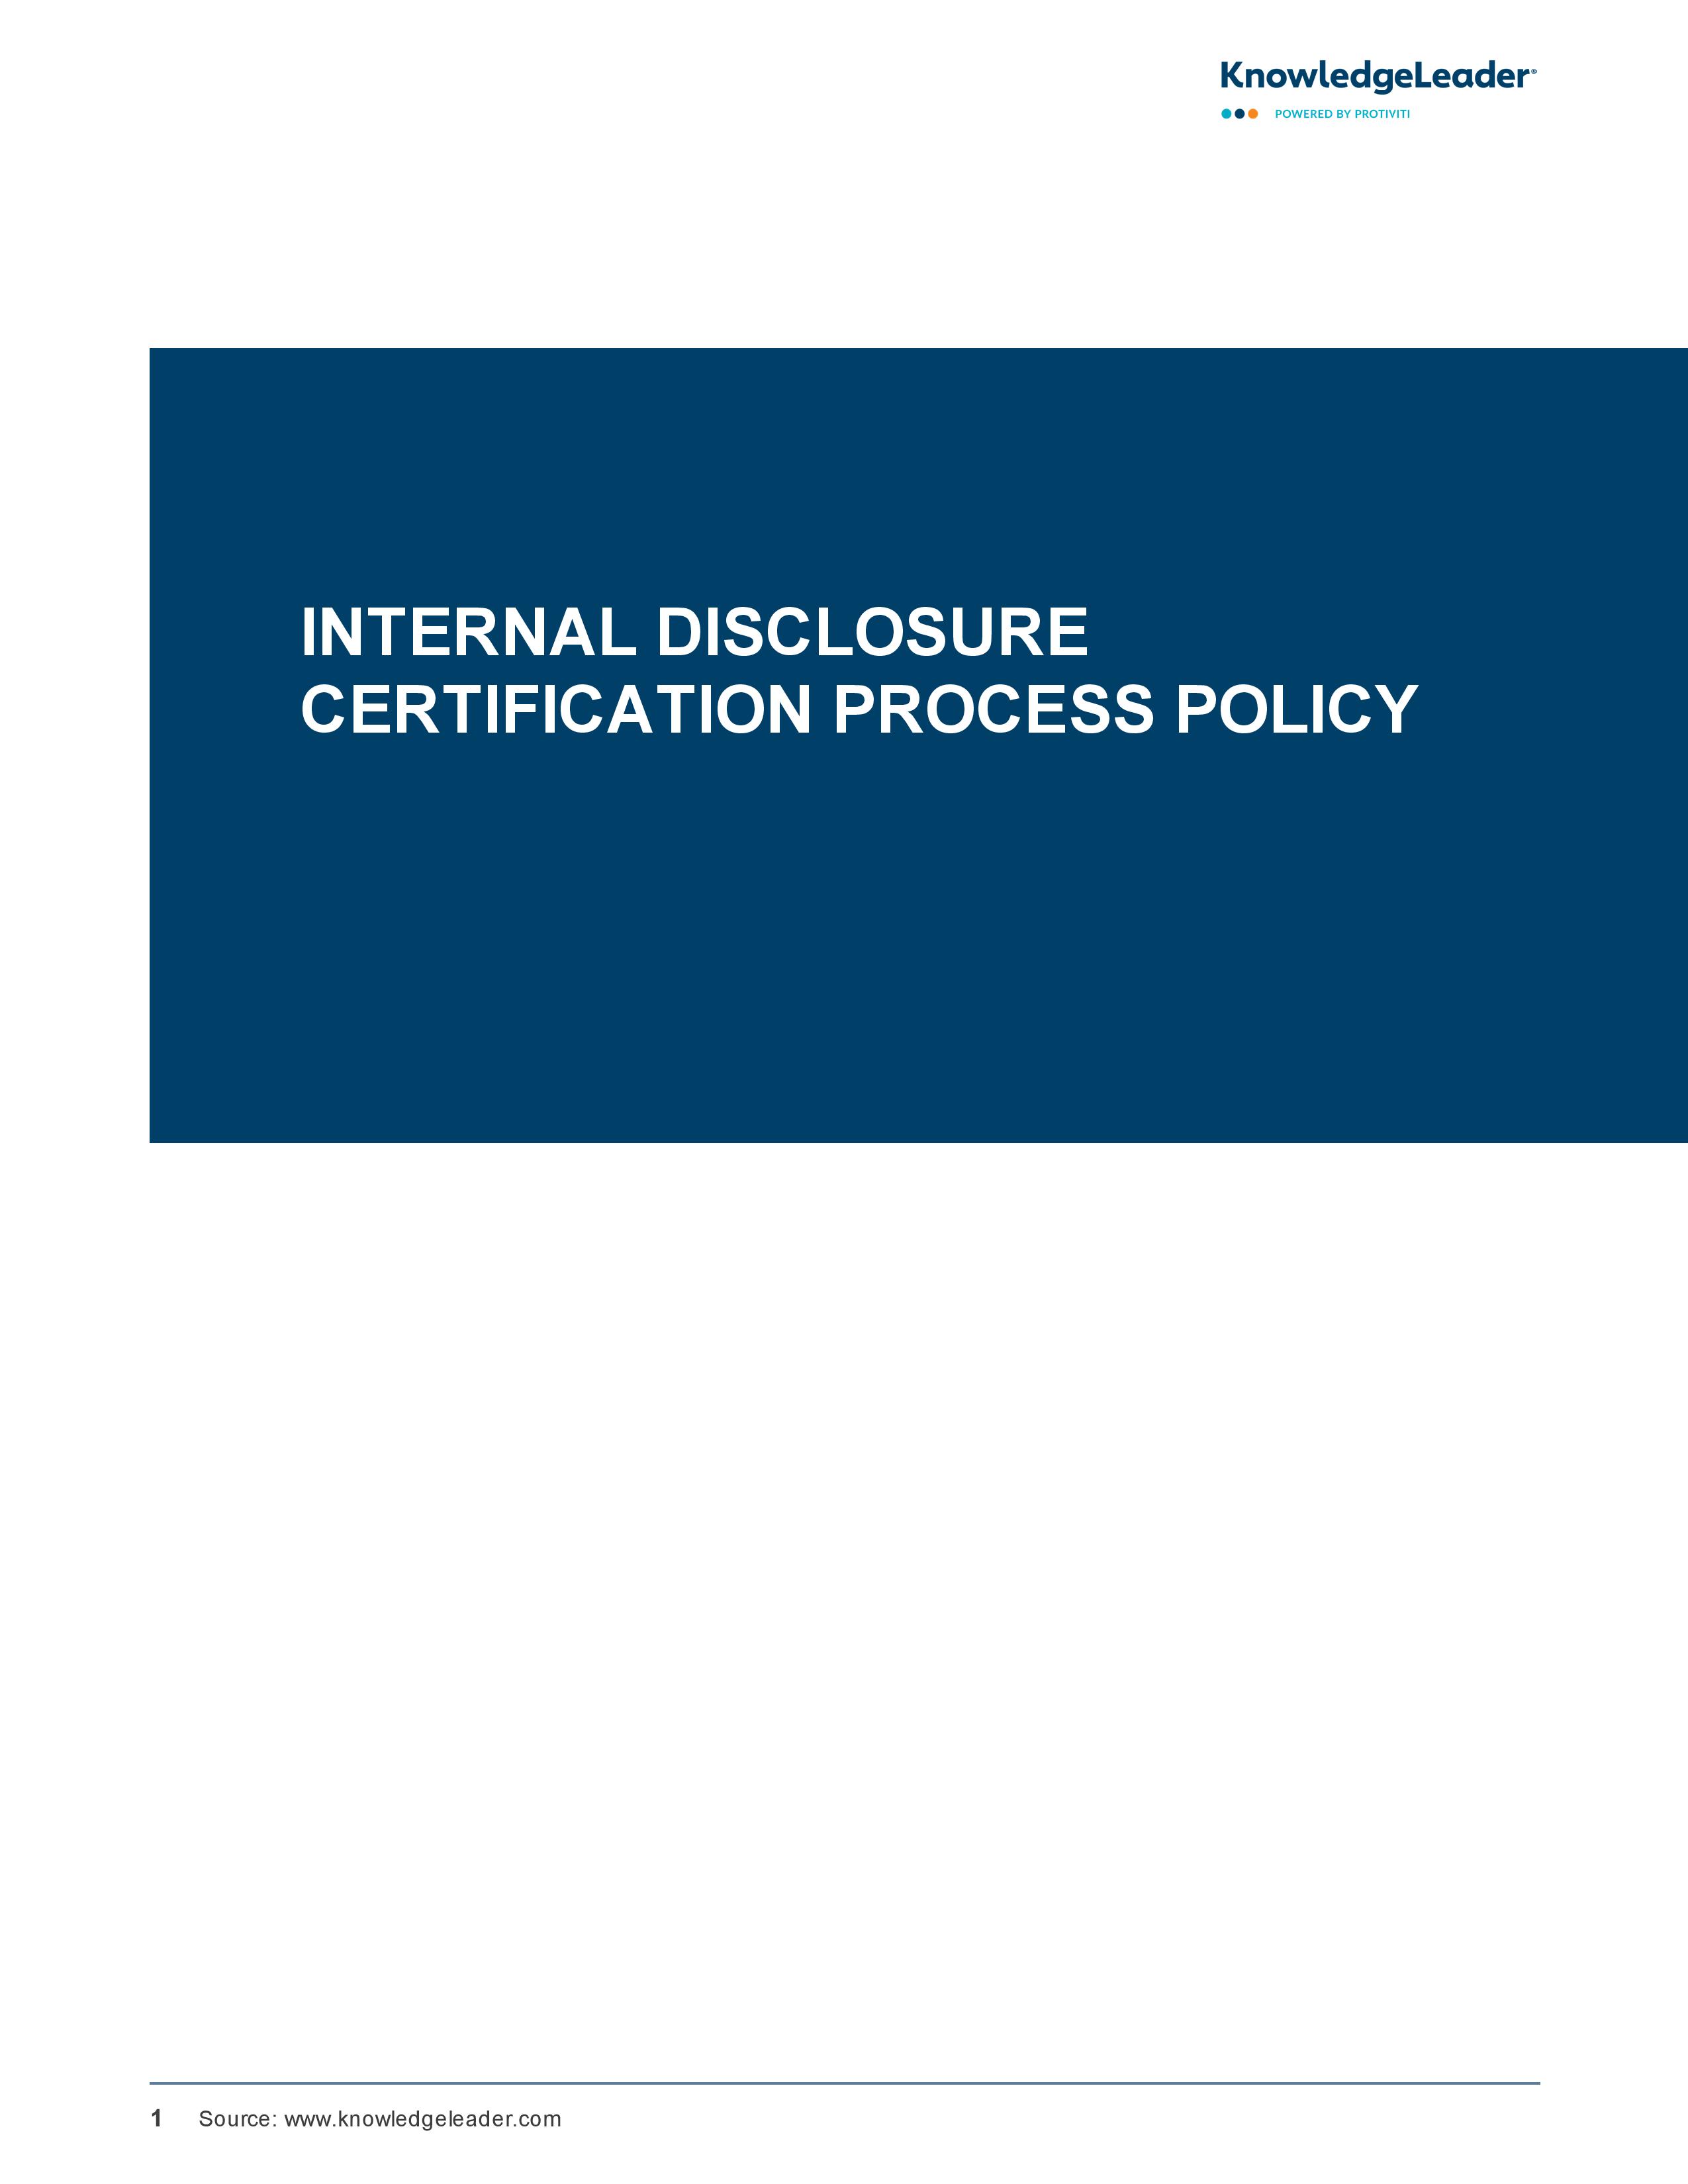 screenshot of the first page of Internal Disclosure Certification Process Policy